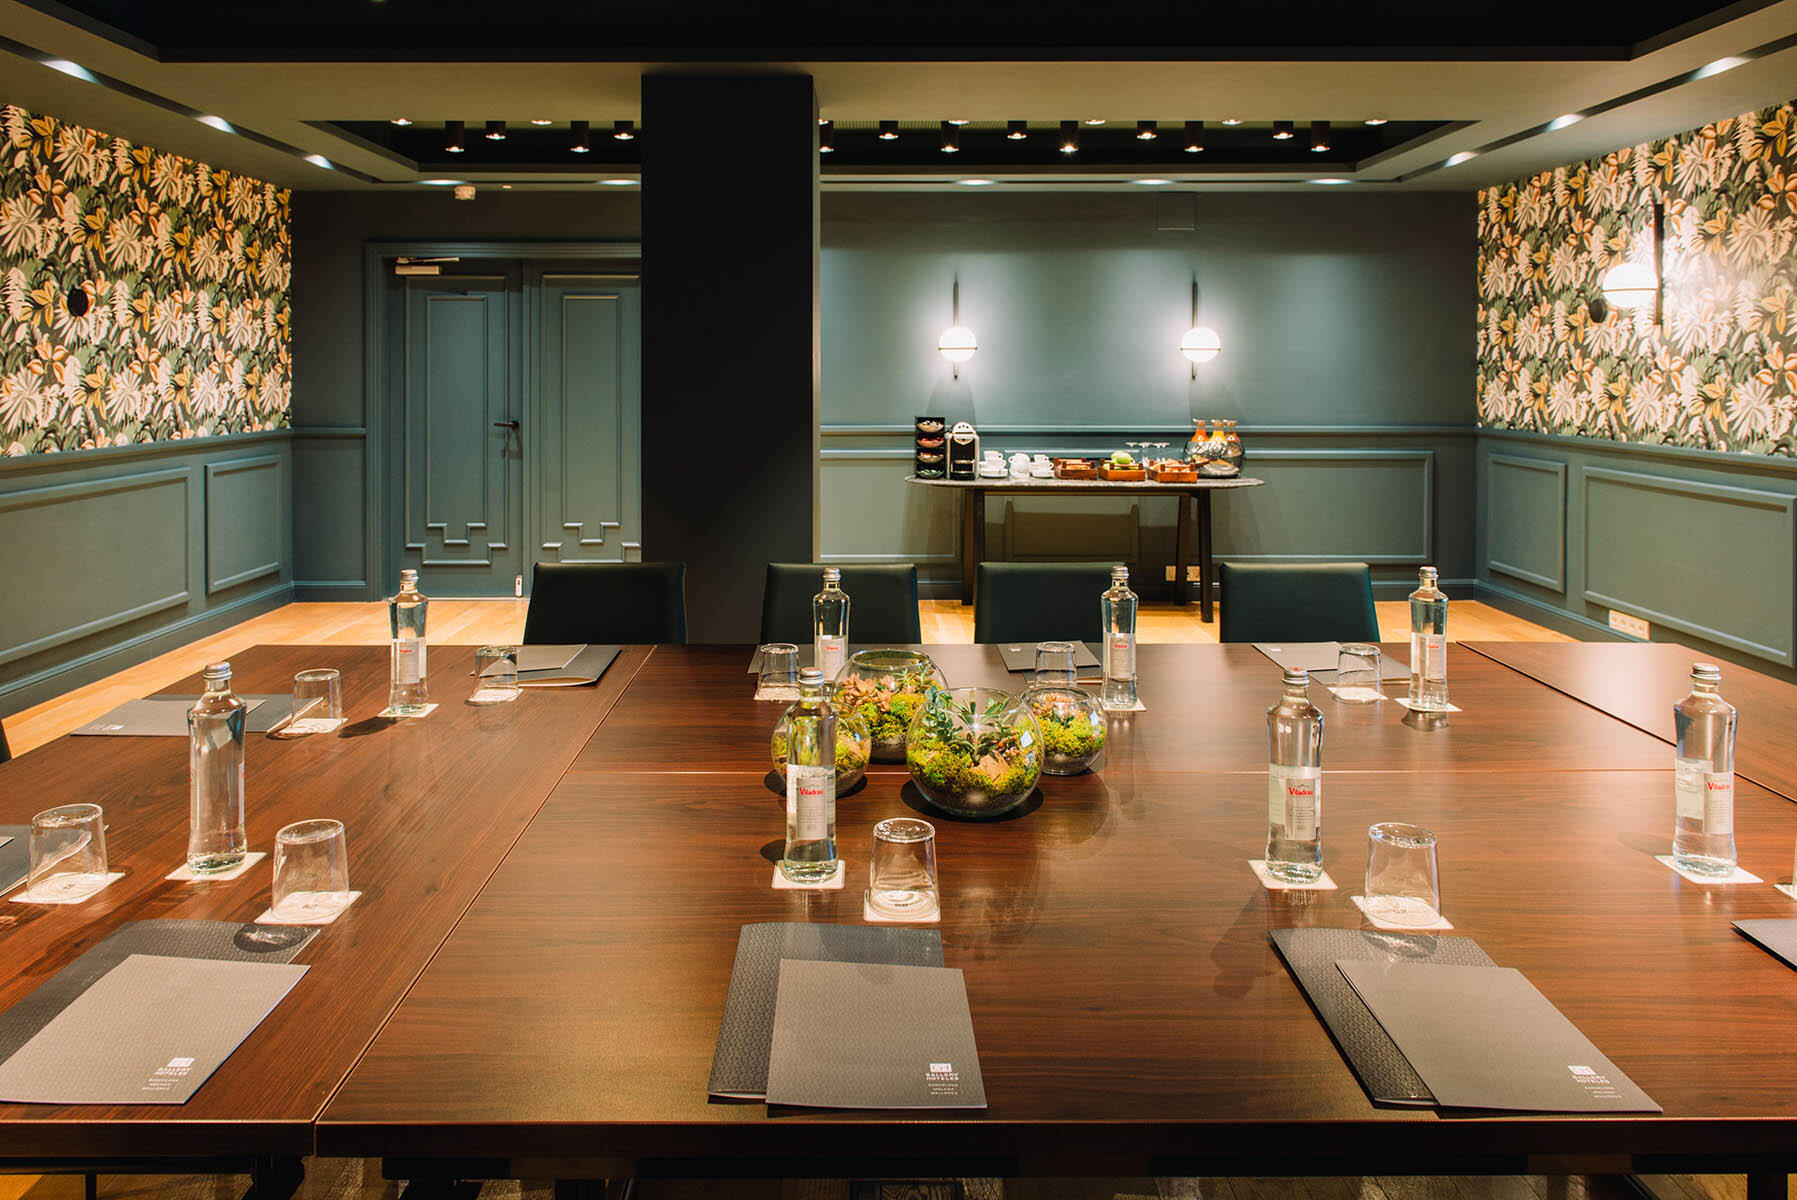 Hotels With Conference Rooms In Chicago - 52 Creative Wedding Ideas